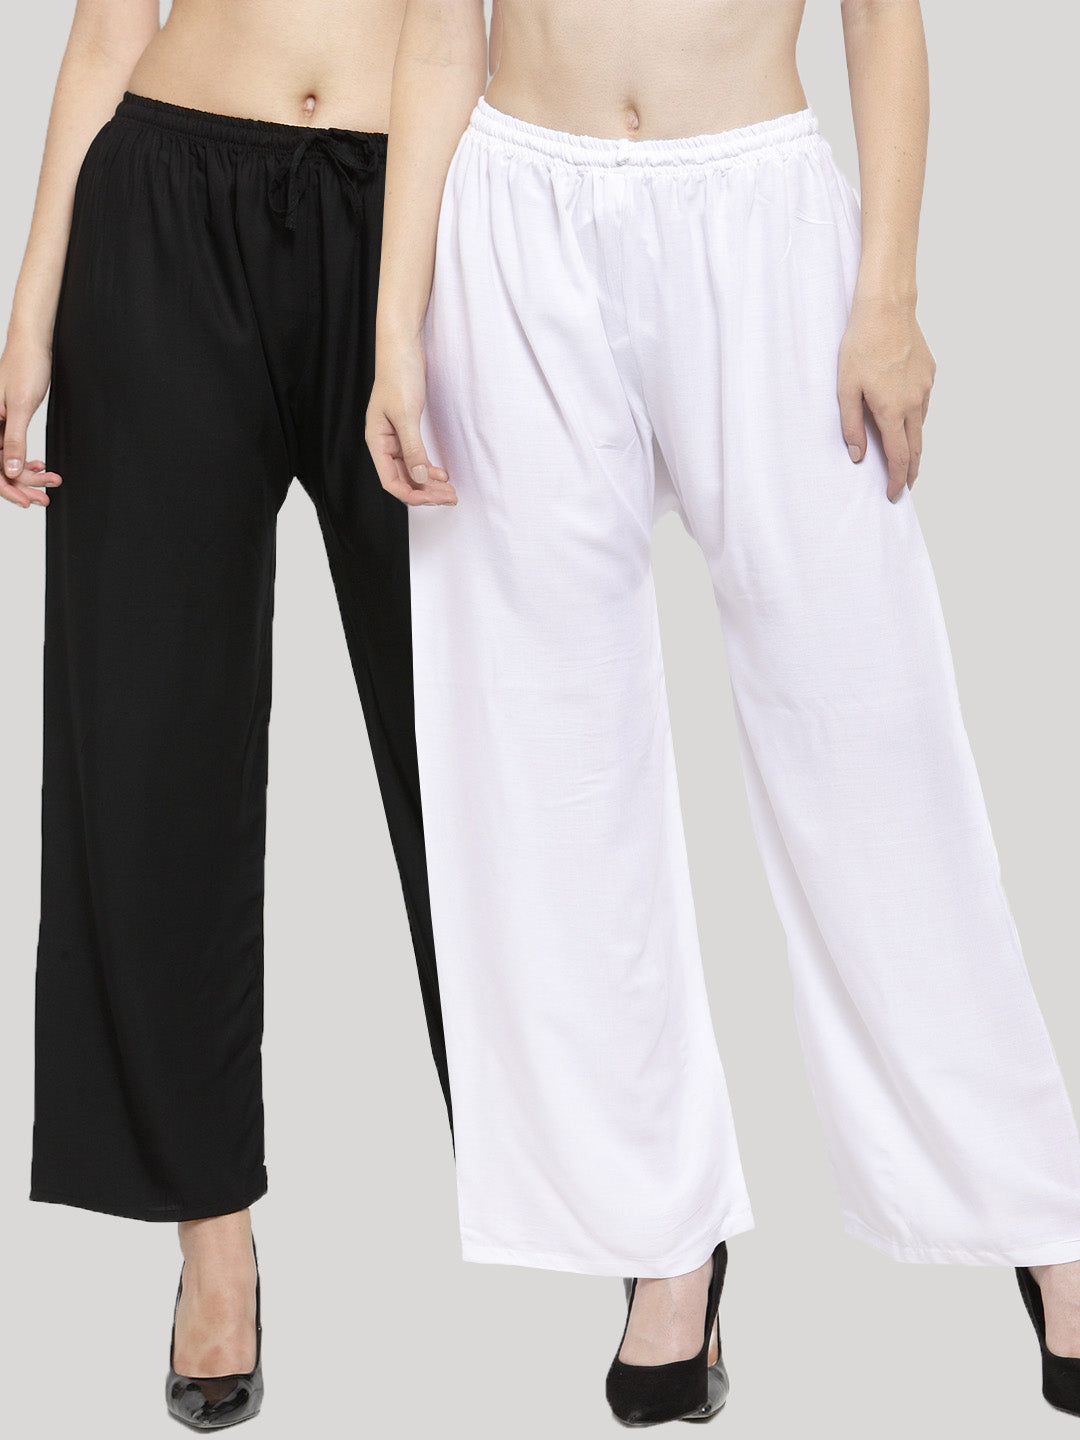 Women's Solid Black & White Rayon Palazzo (Pack Of 2) - Wahe-NOOR